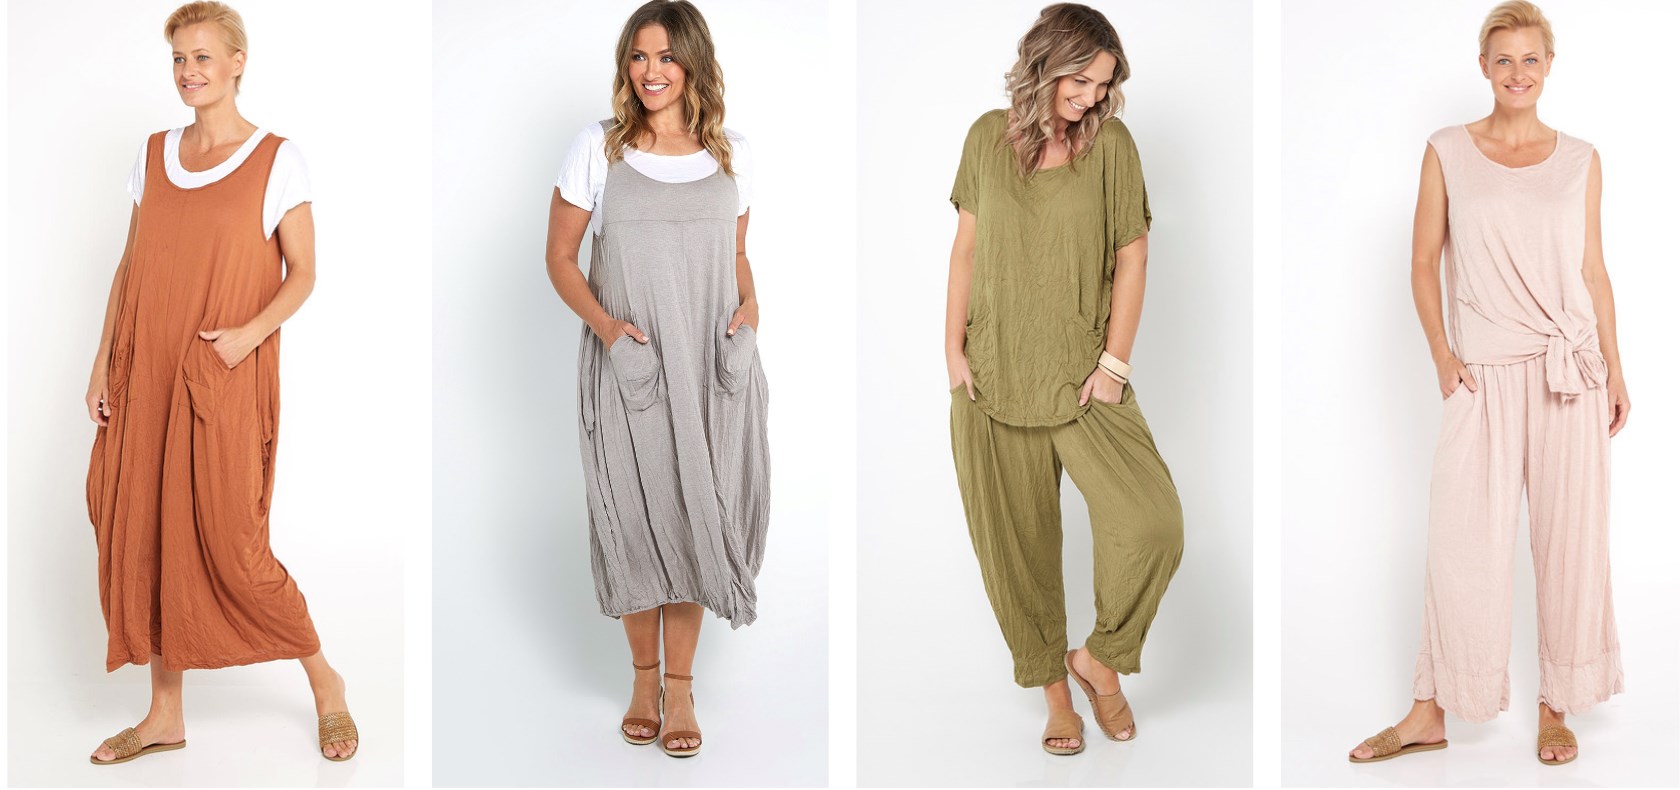 Tulio up to 60% OFF on sale clothing & accessories